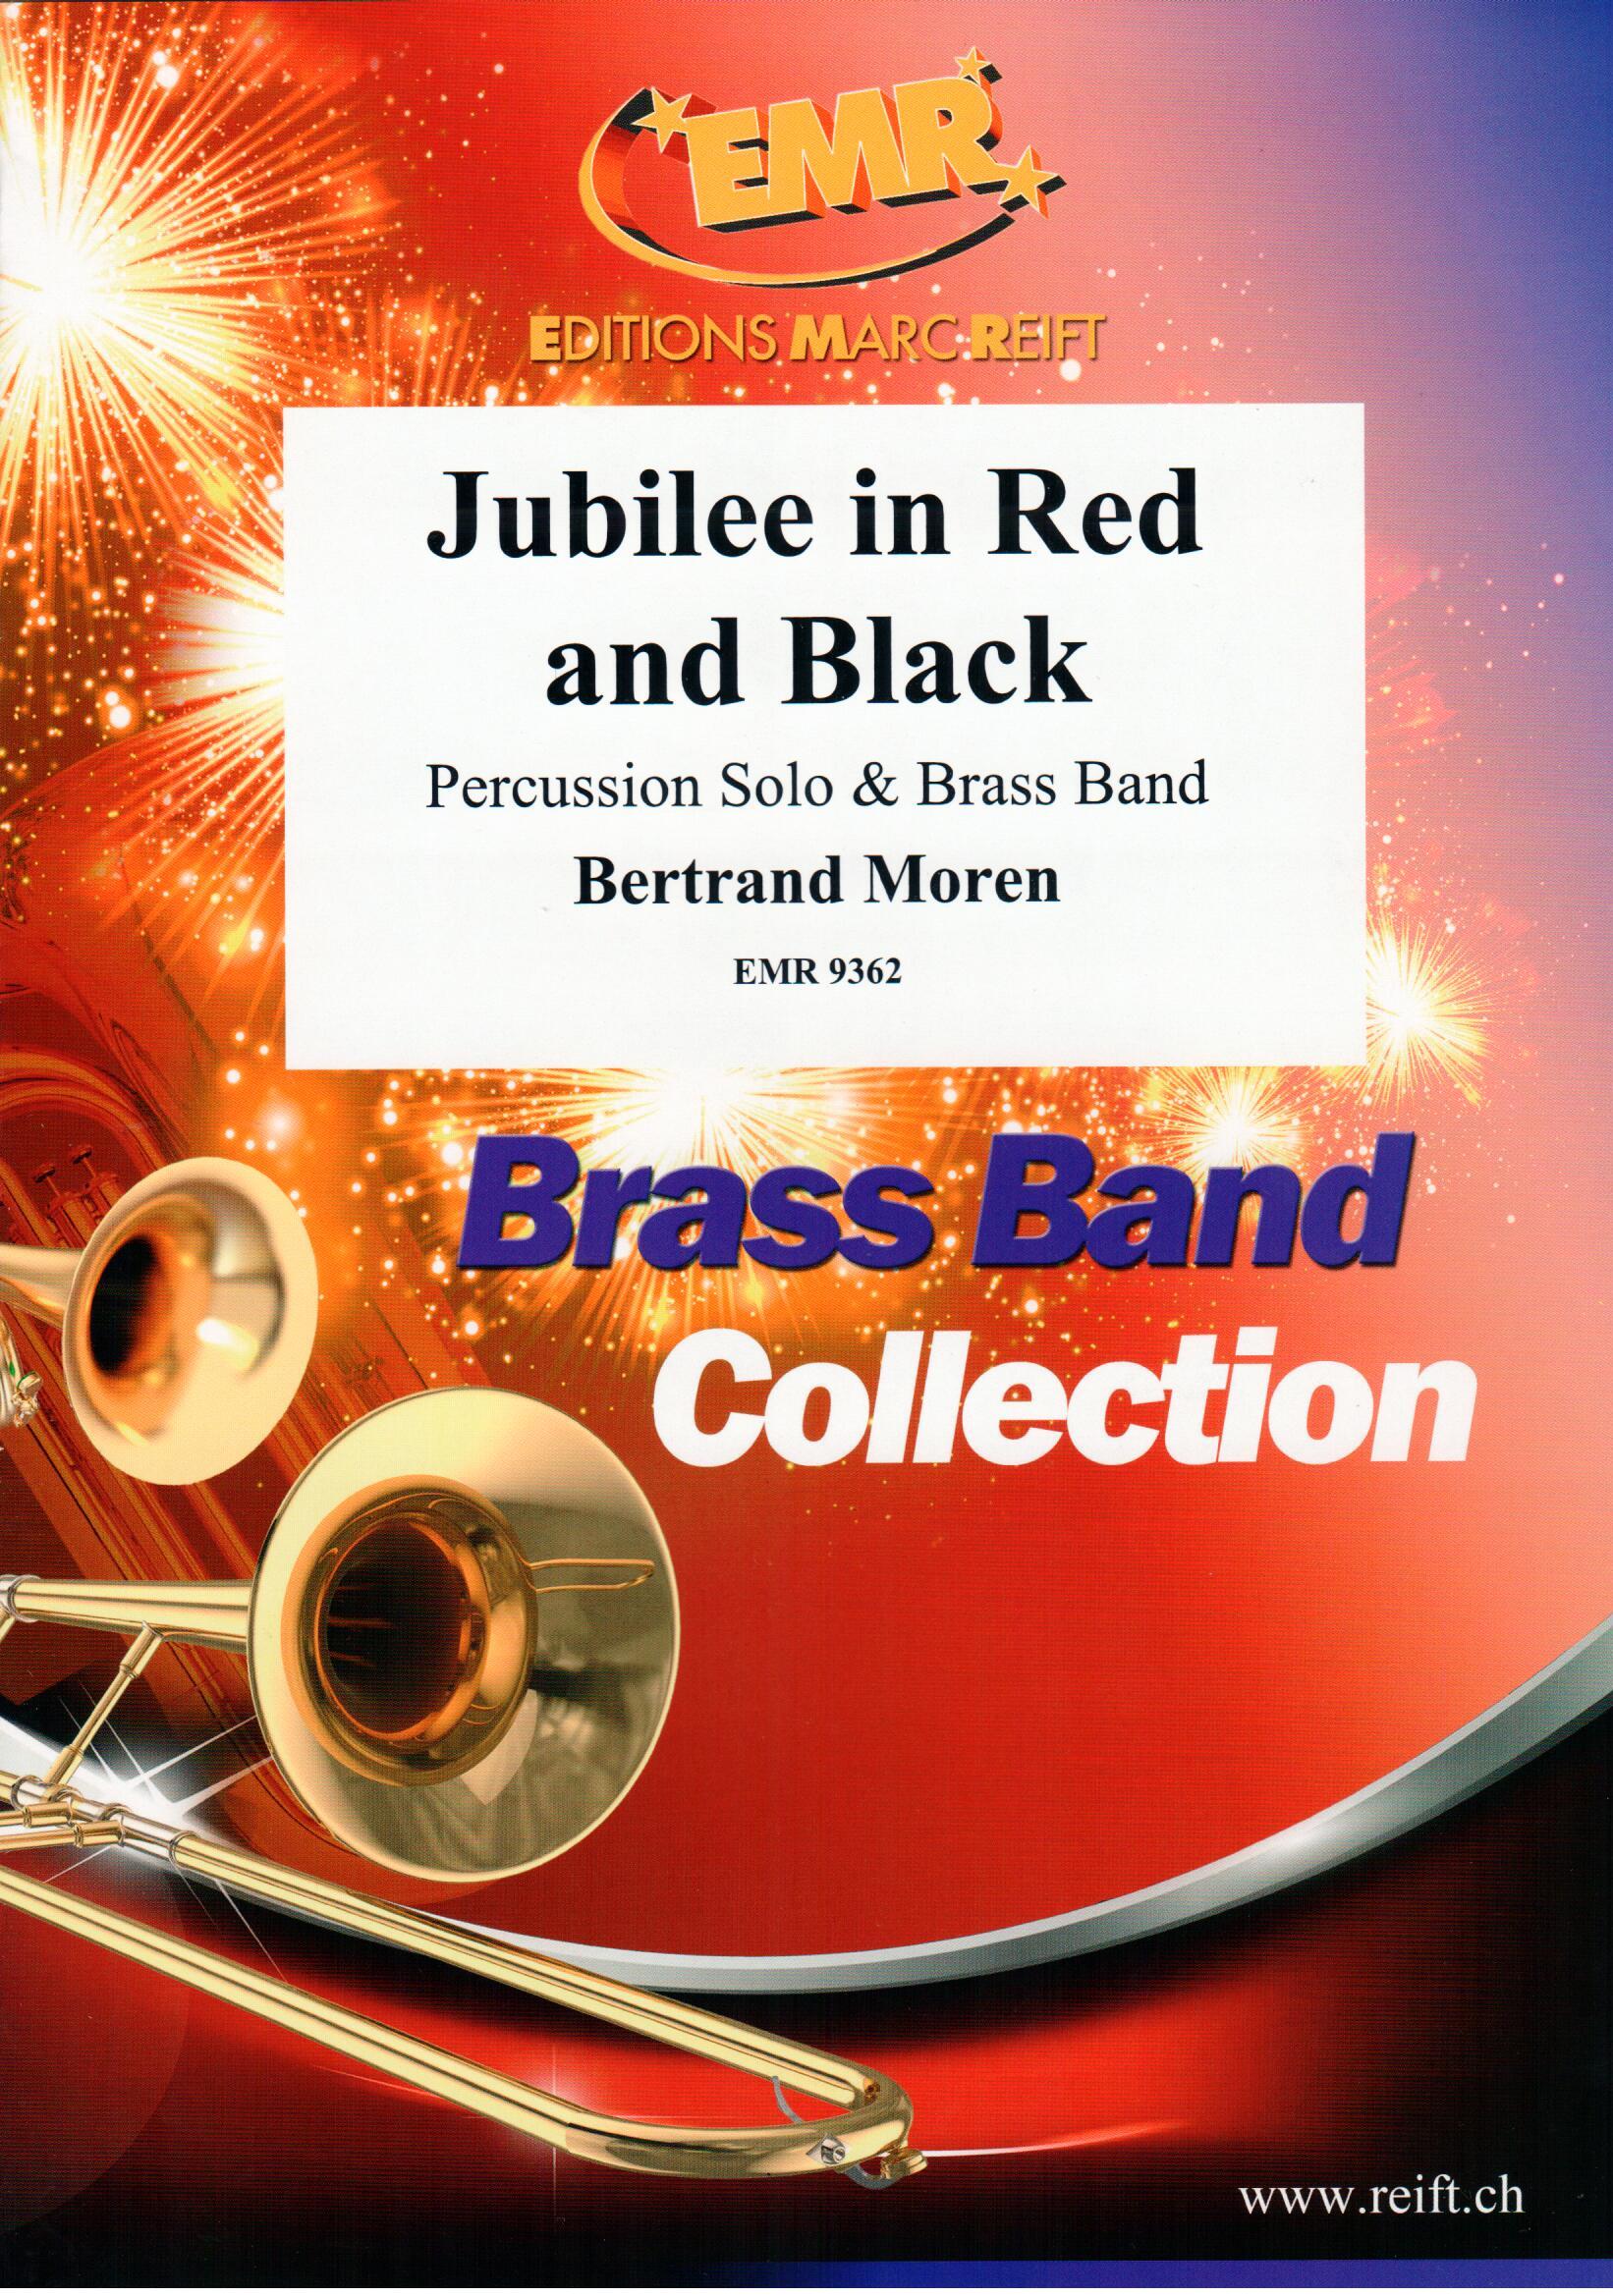 JUBILEE IN RED AND BLACK, EMR BRASS BAND